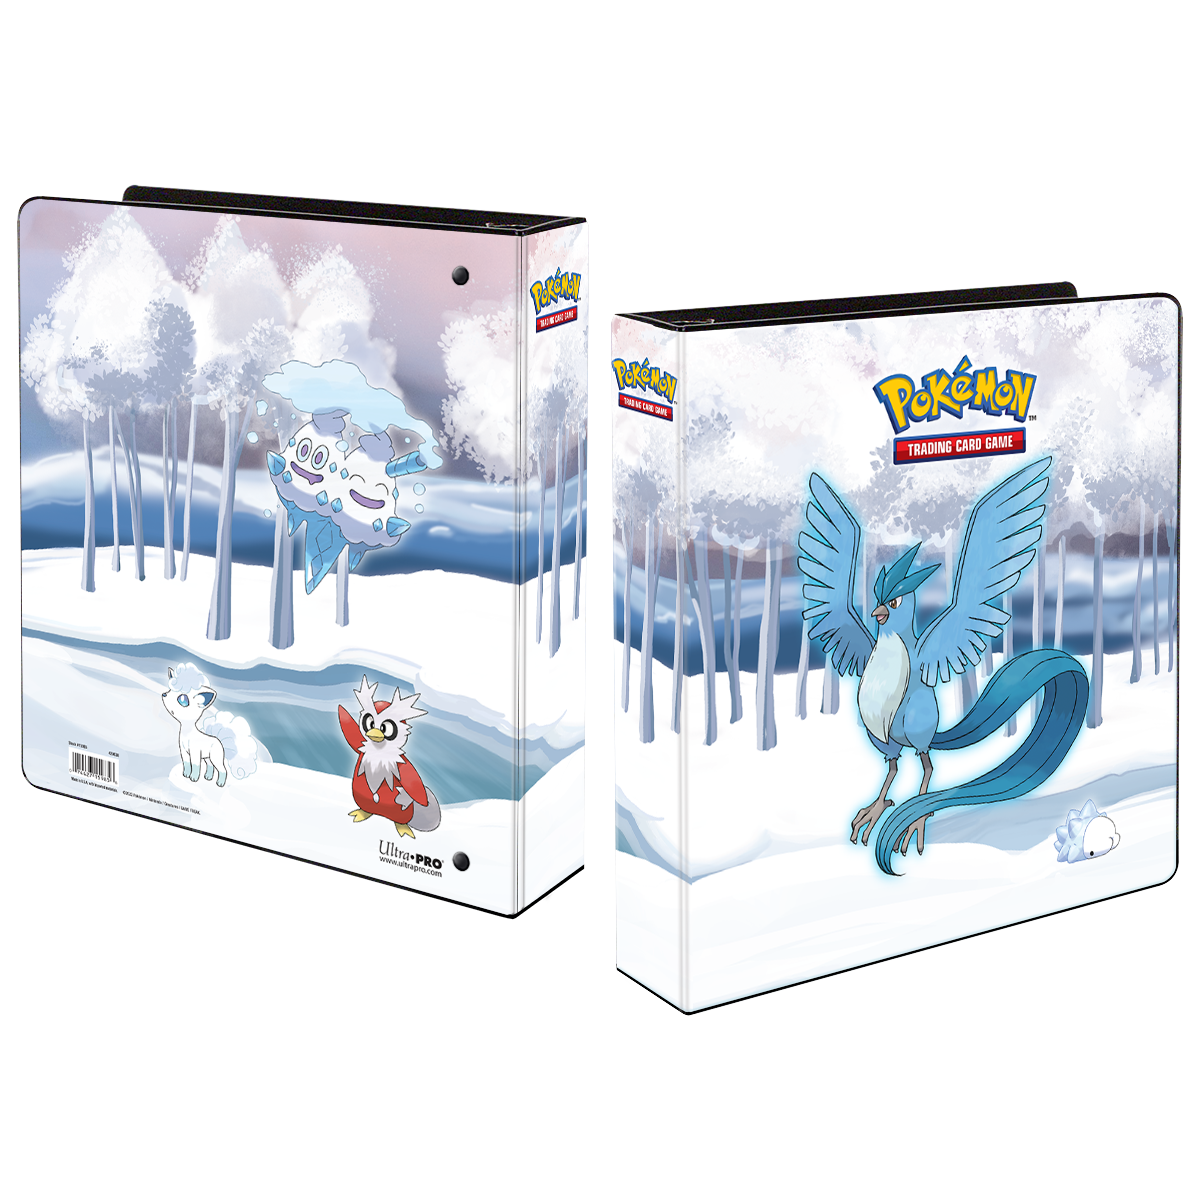 Gallery Series Frosted Forest 2” Album for Pokémon | Ultra PRO International